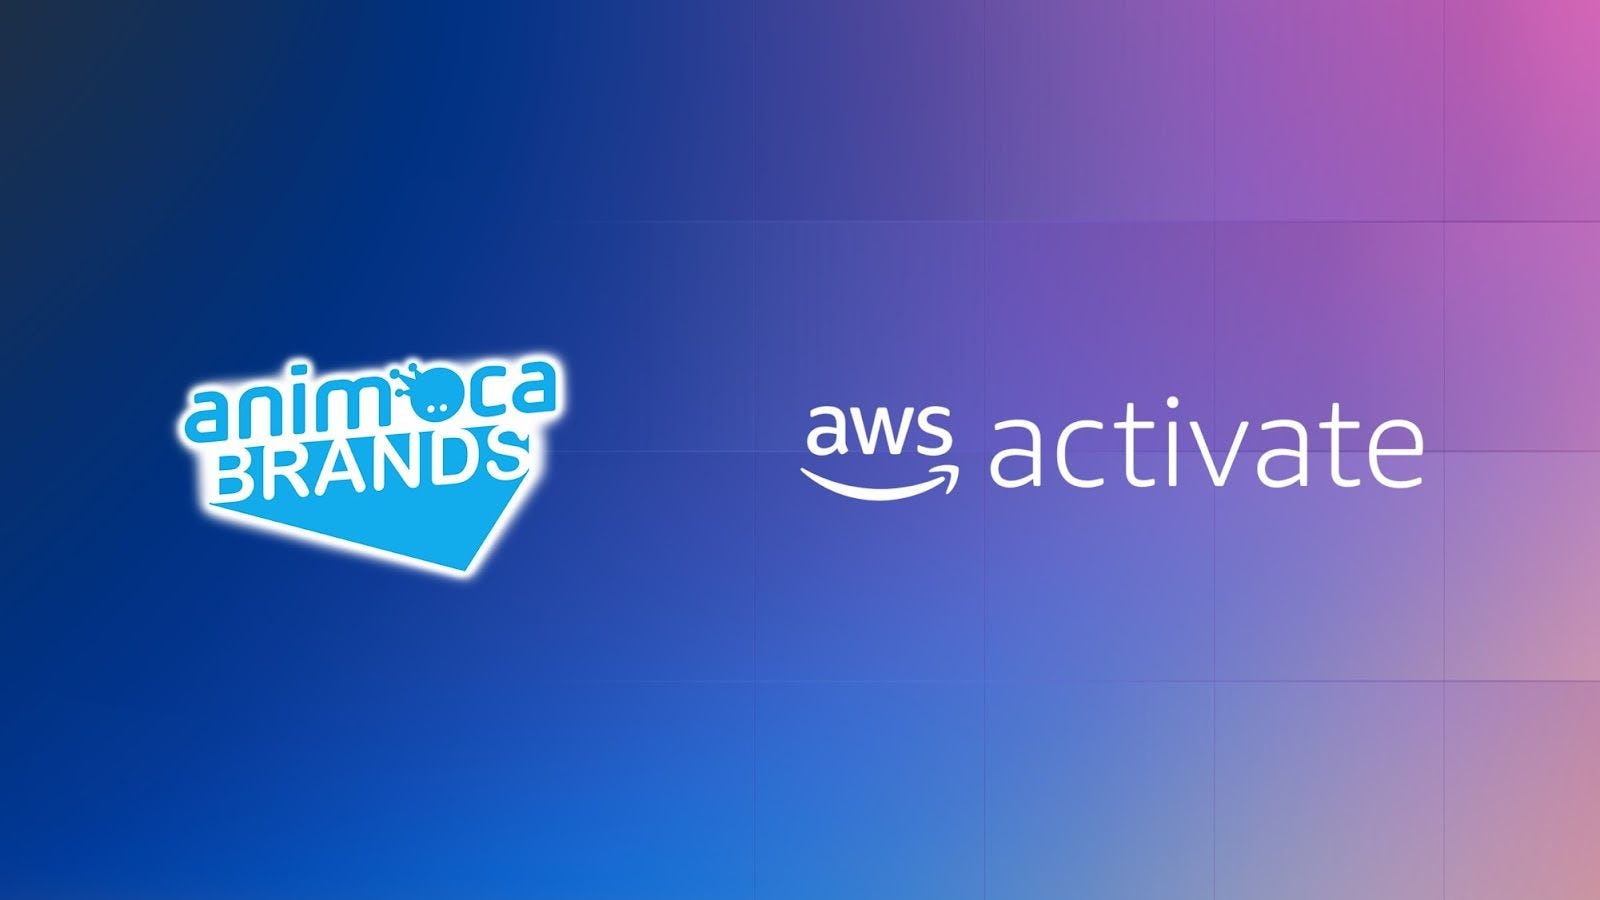 Animoca Brands Partners with AWS as Official Activate Provider